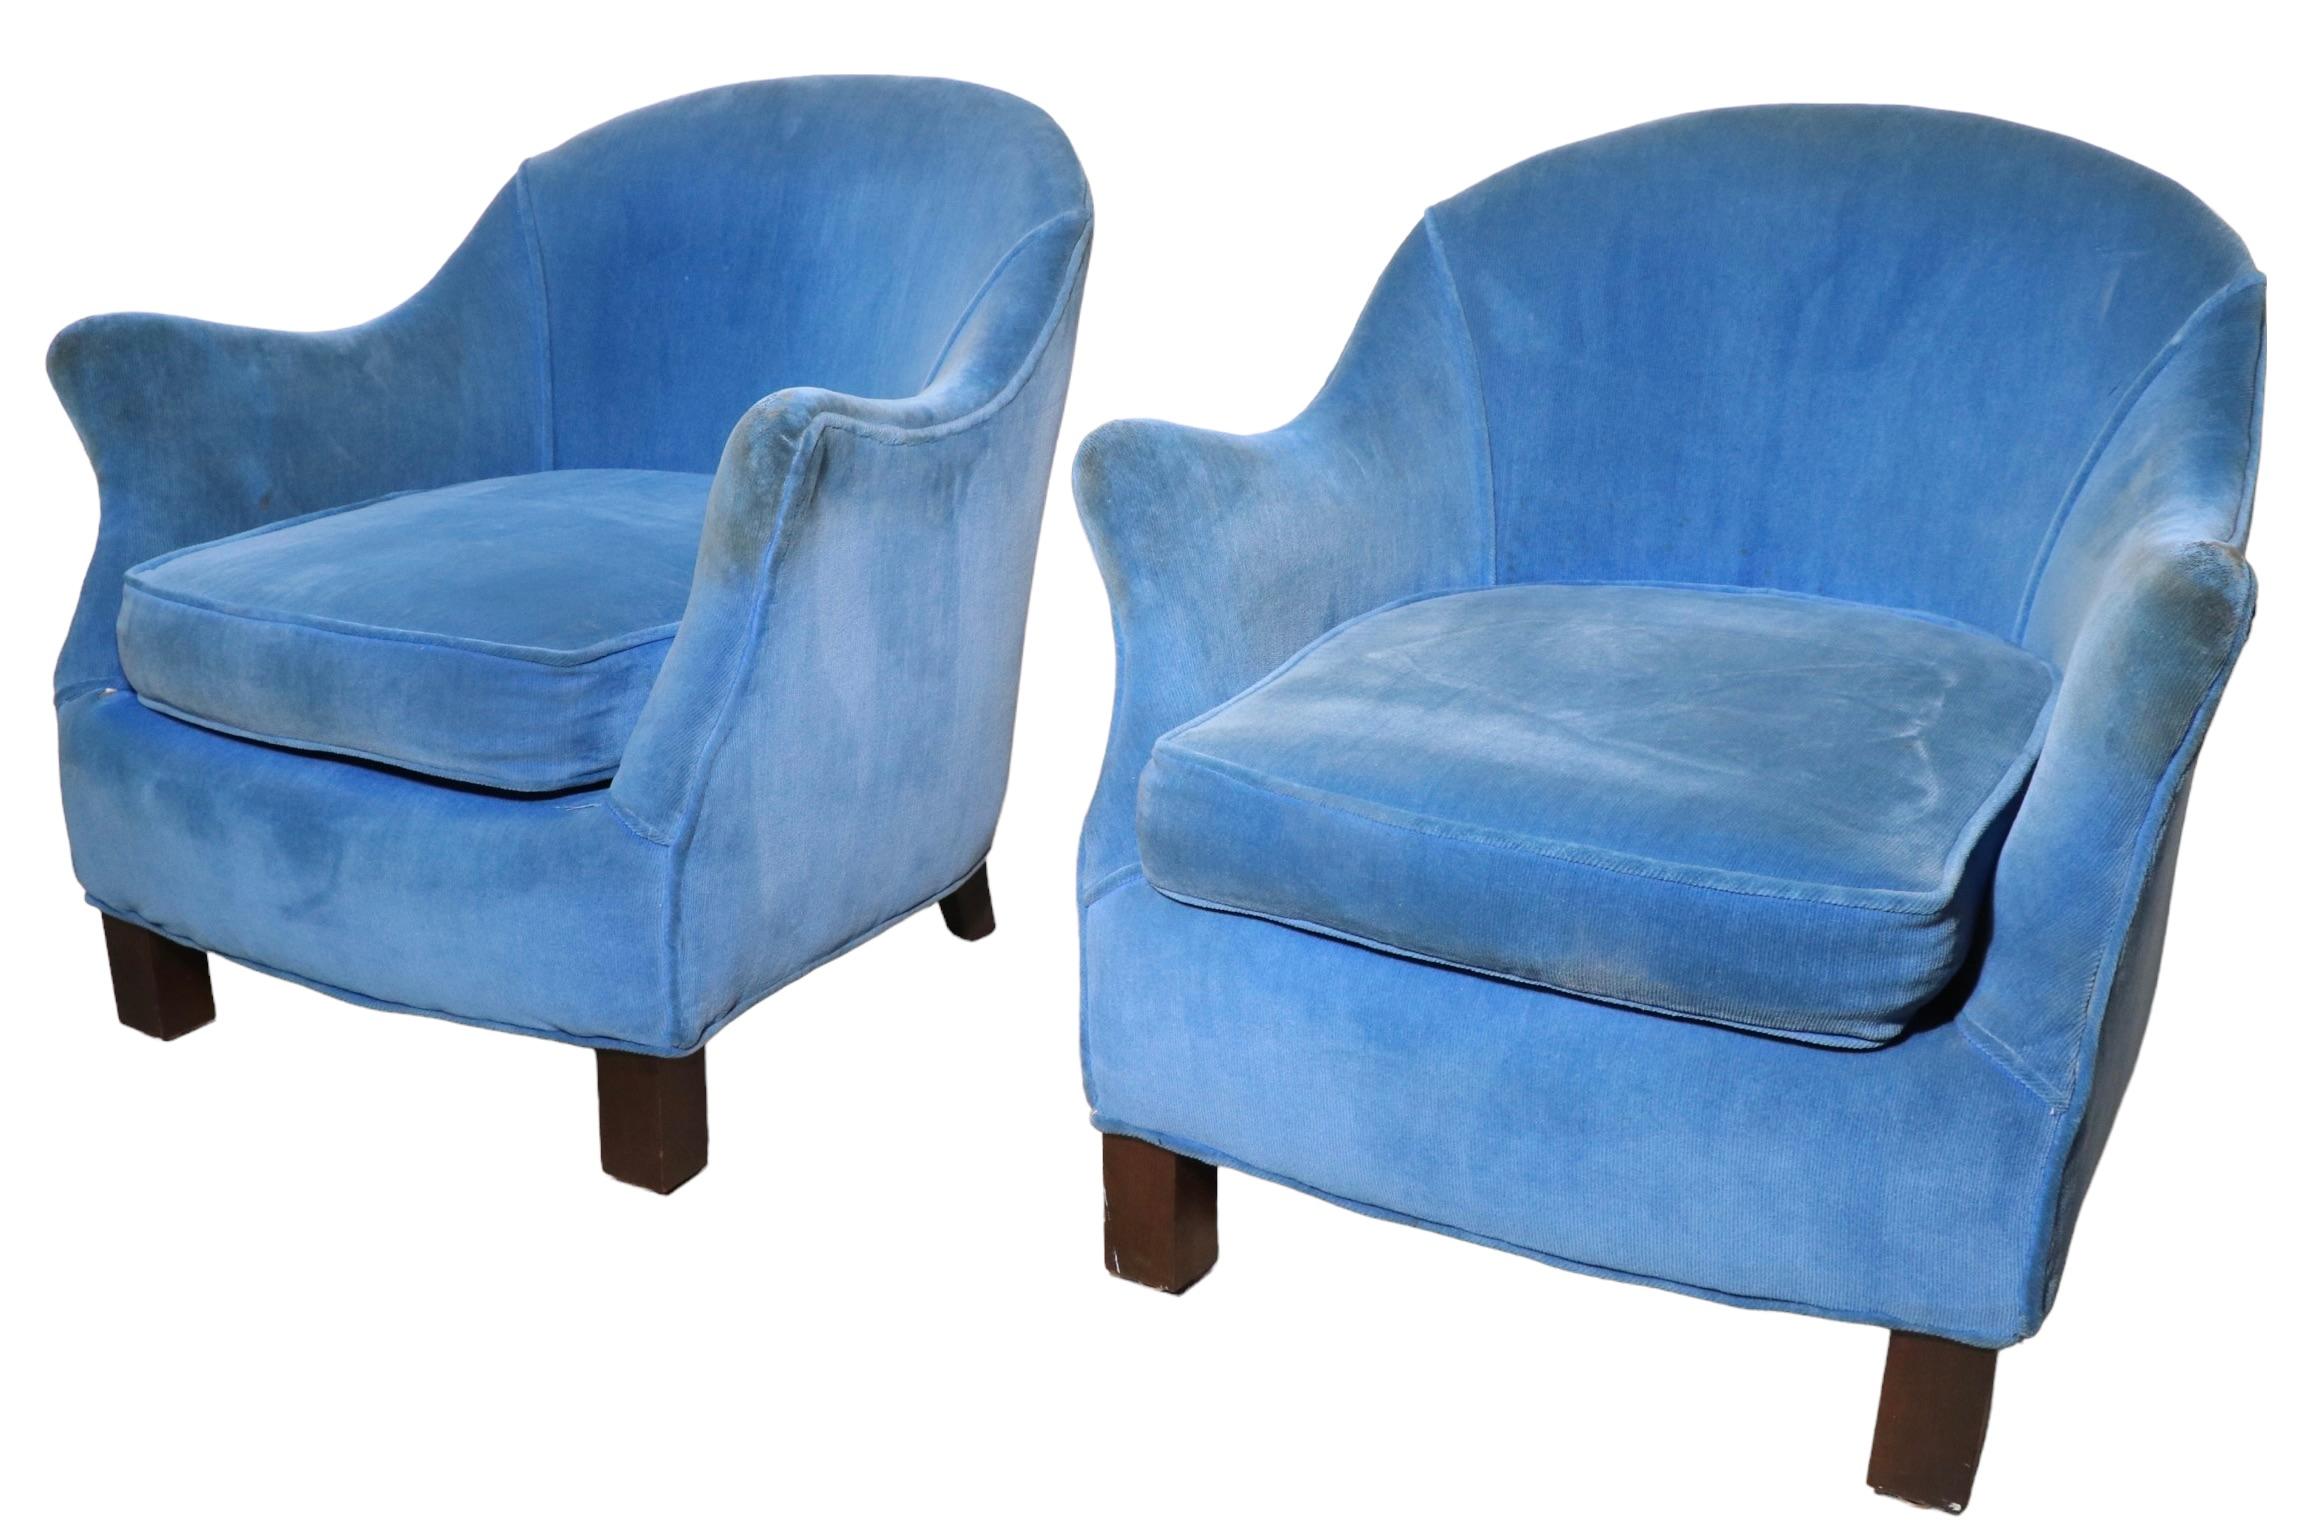 Pr. of Lounge Chairs Att. to Dunbar In Good Condition For Sale In New York, NY